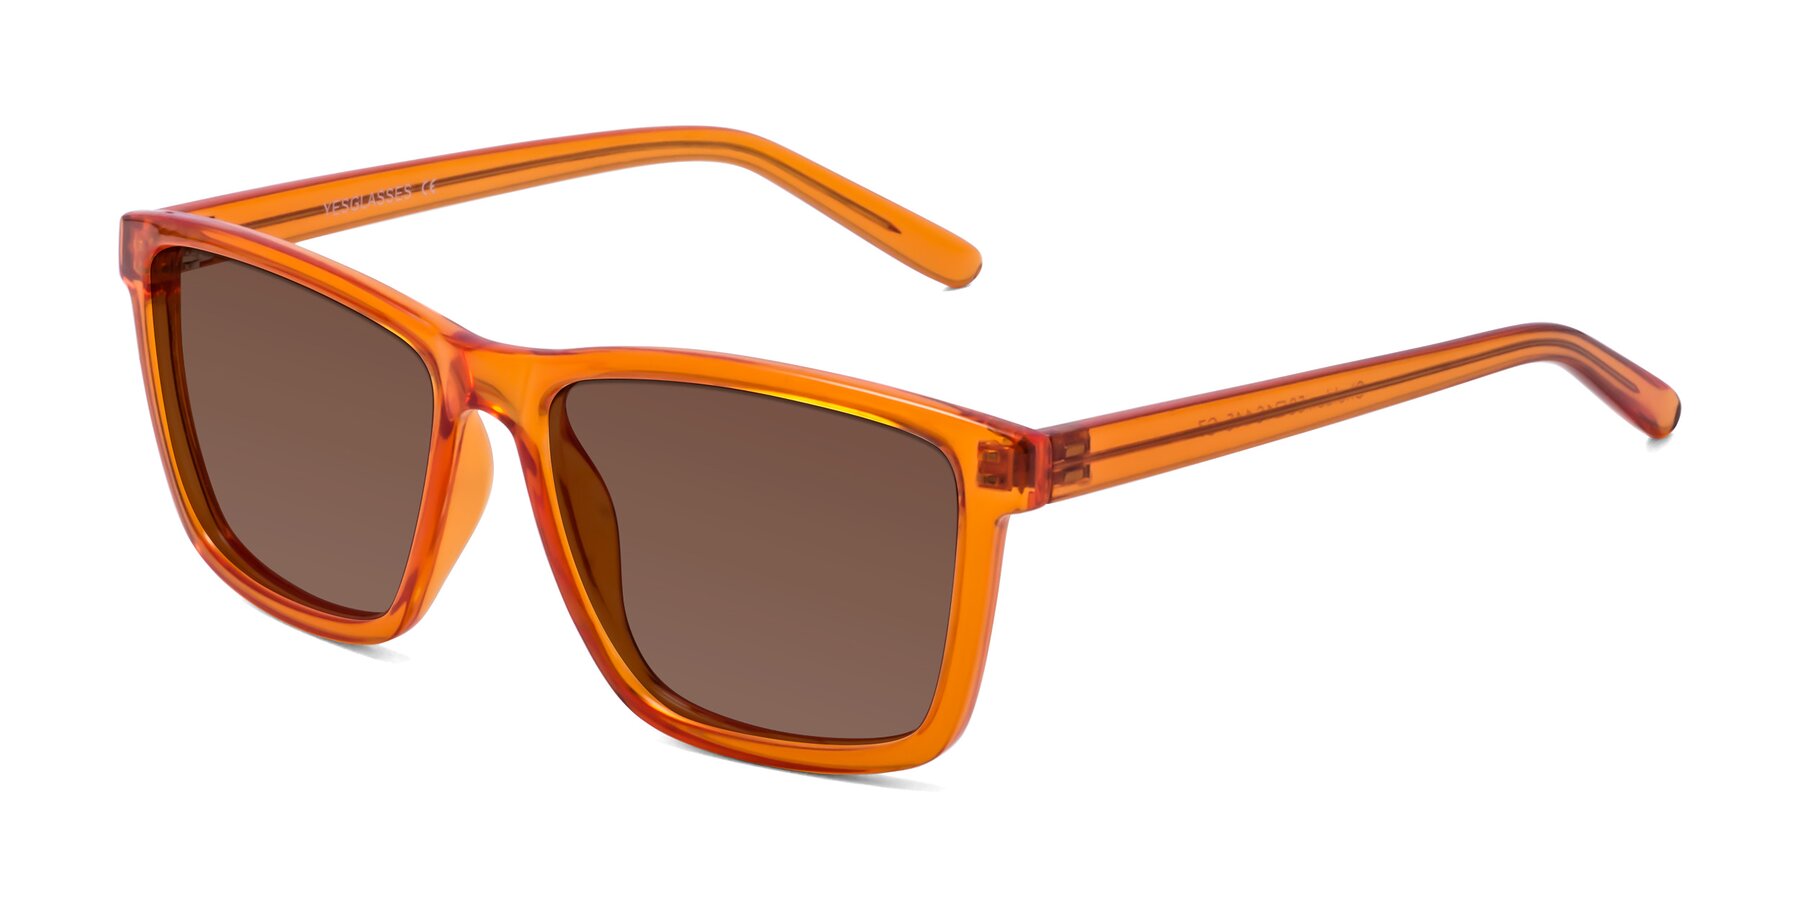 Angle of Sheldon in Orange with Brown Tinted Lenses